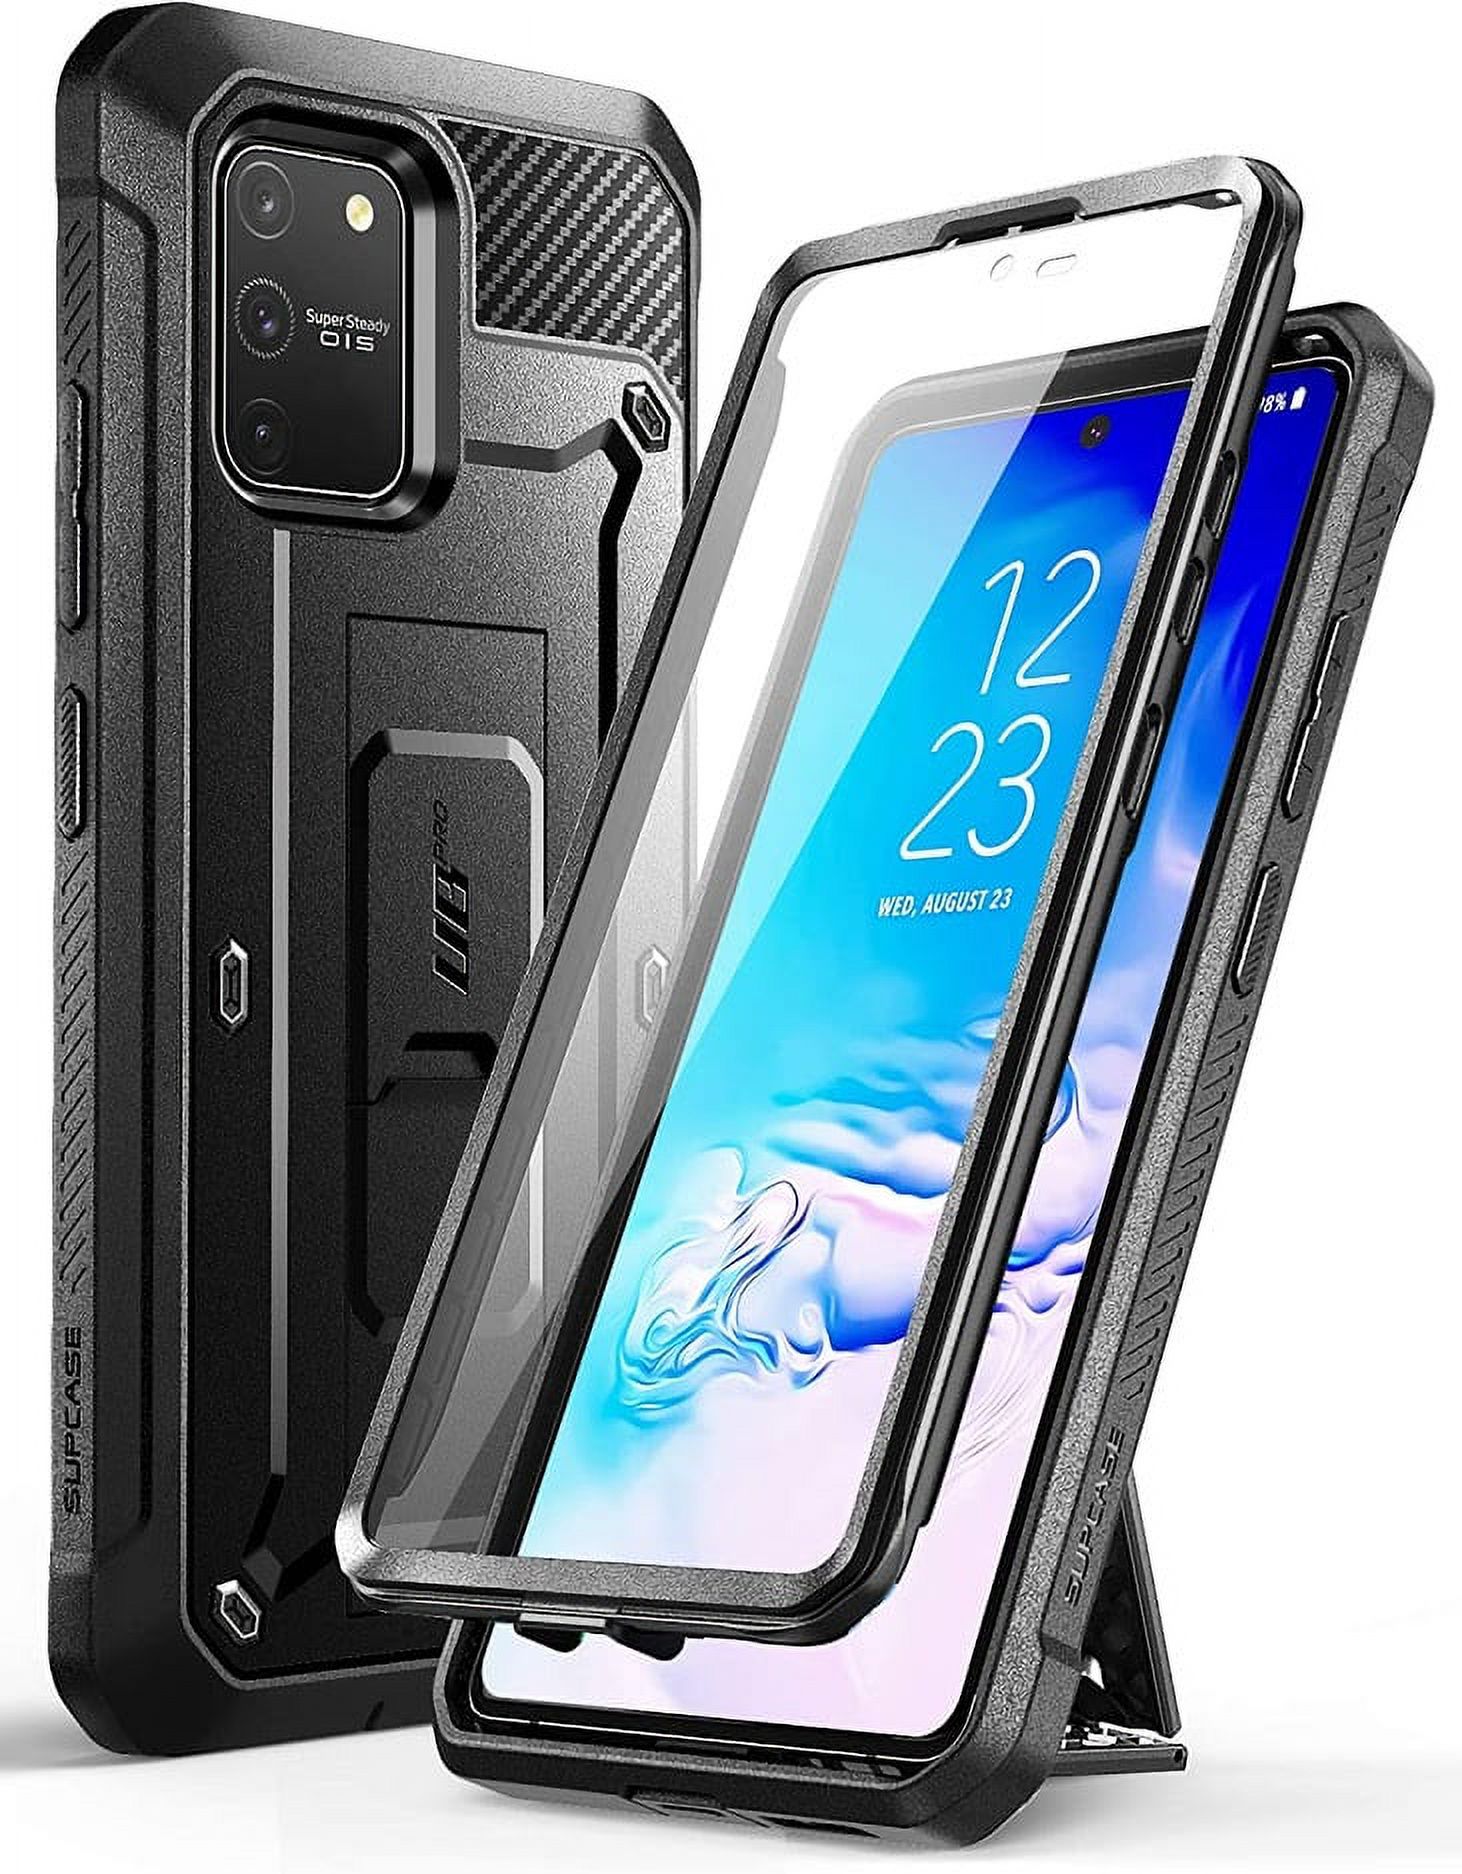 SUPCASE Unicorn Beetle Pro Series Design for Galaxy S10 Lite Case,Full-Body Dual Layer Rugged Holster & Kickstand with Built-in Screen Protector for Samsung Galaxy S10 Lite (2020 Release) (Black) - image 1 of 7